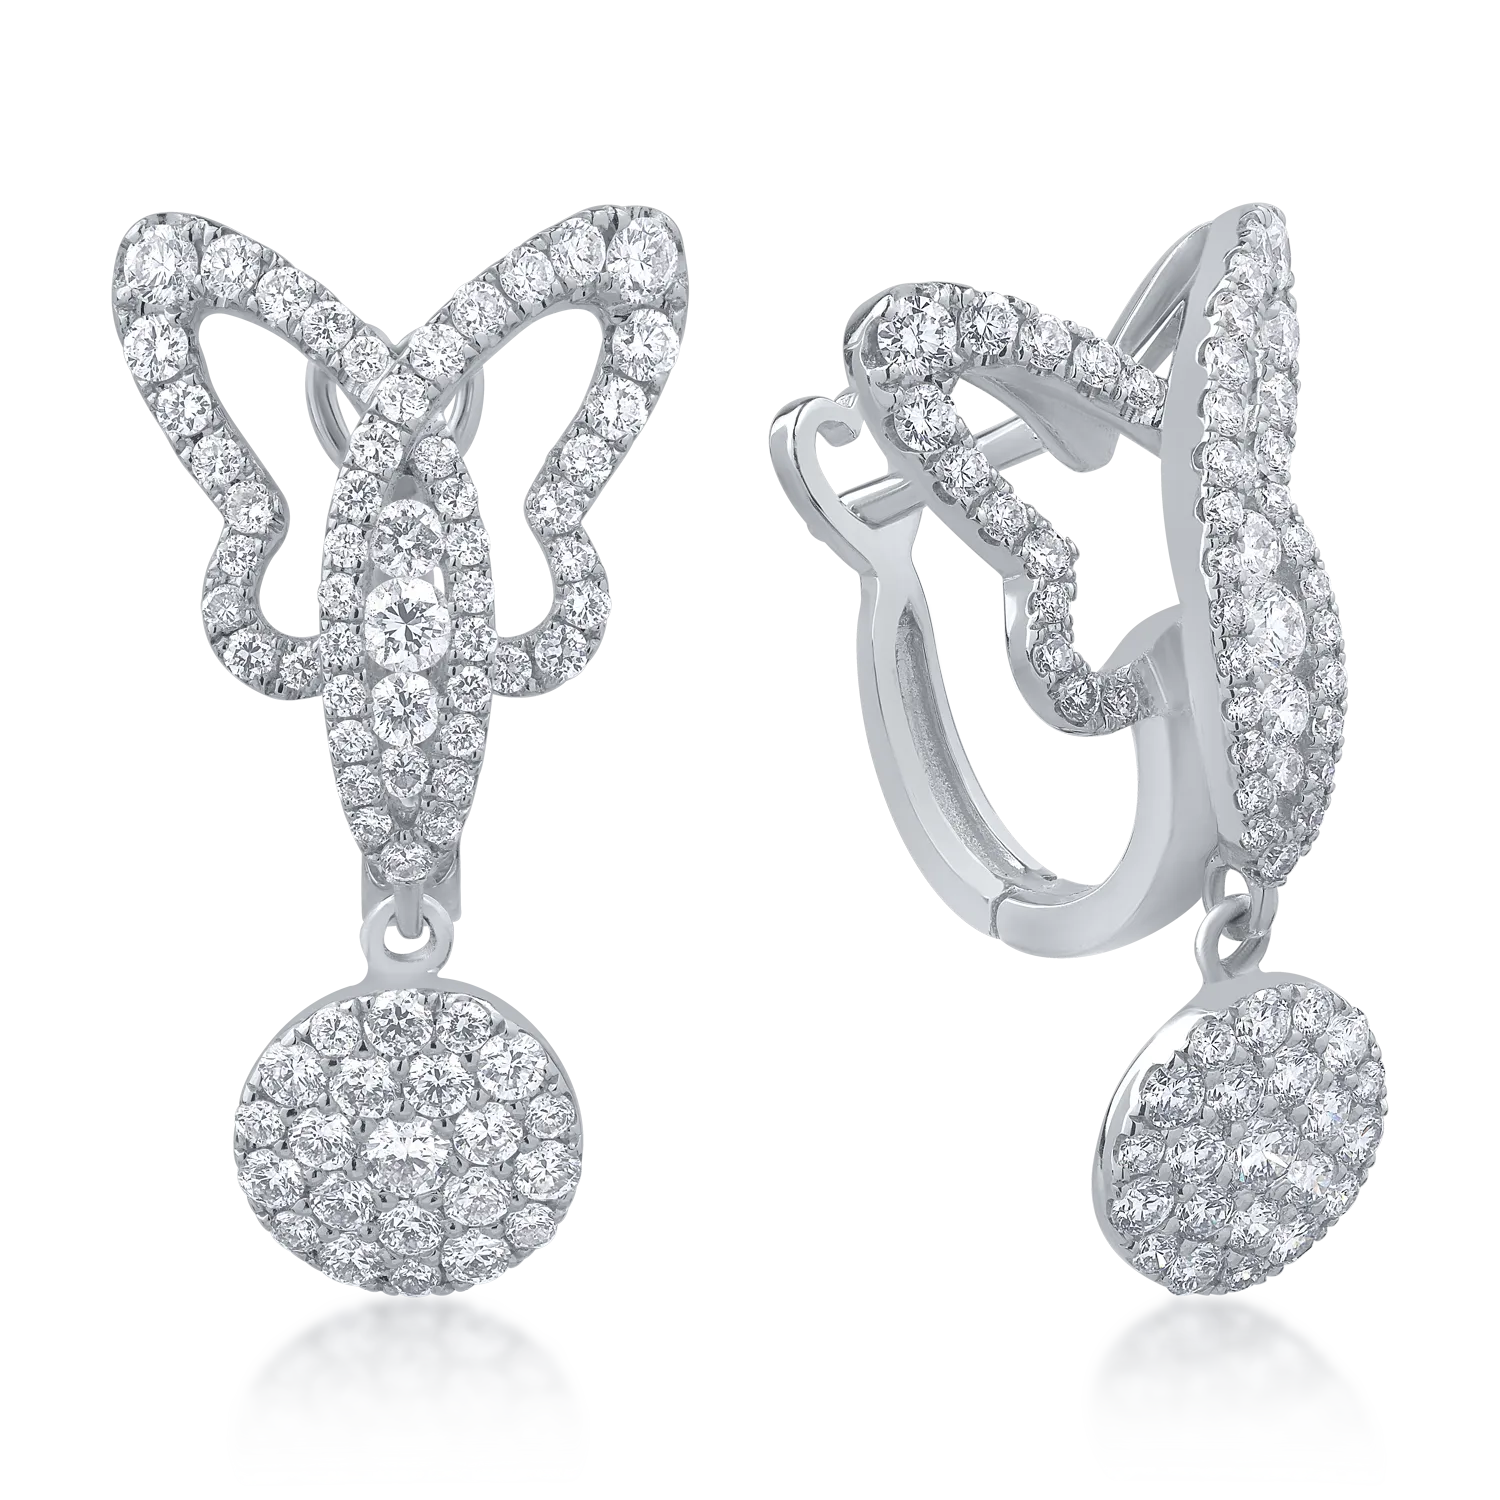 18K white gold earrings with 1.15ct diamonds